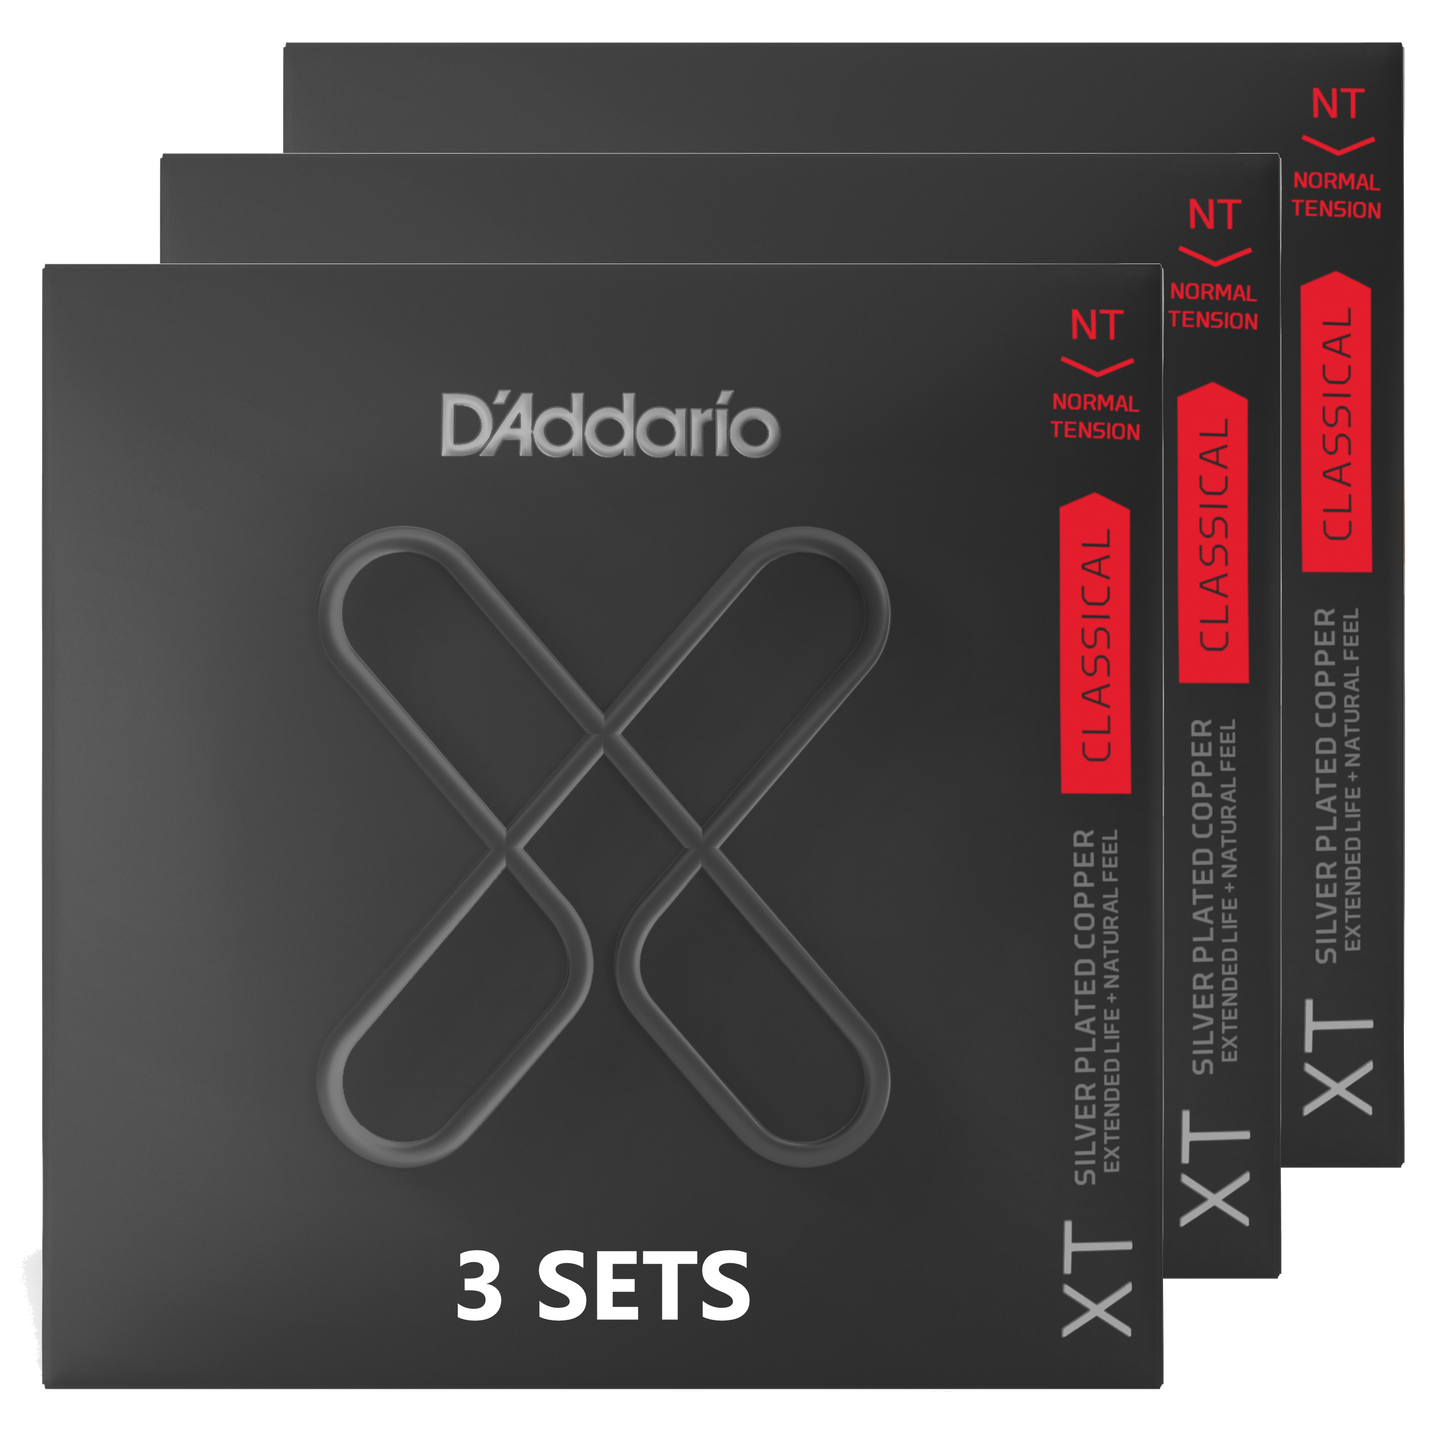 D'Addario XTC45-3P, XT Classical Silver Plated Copper, Normal Tension (3 SETS)